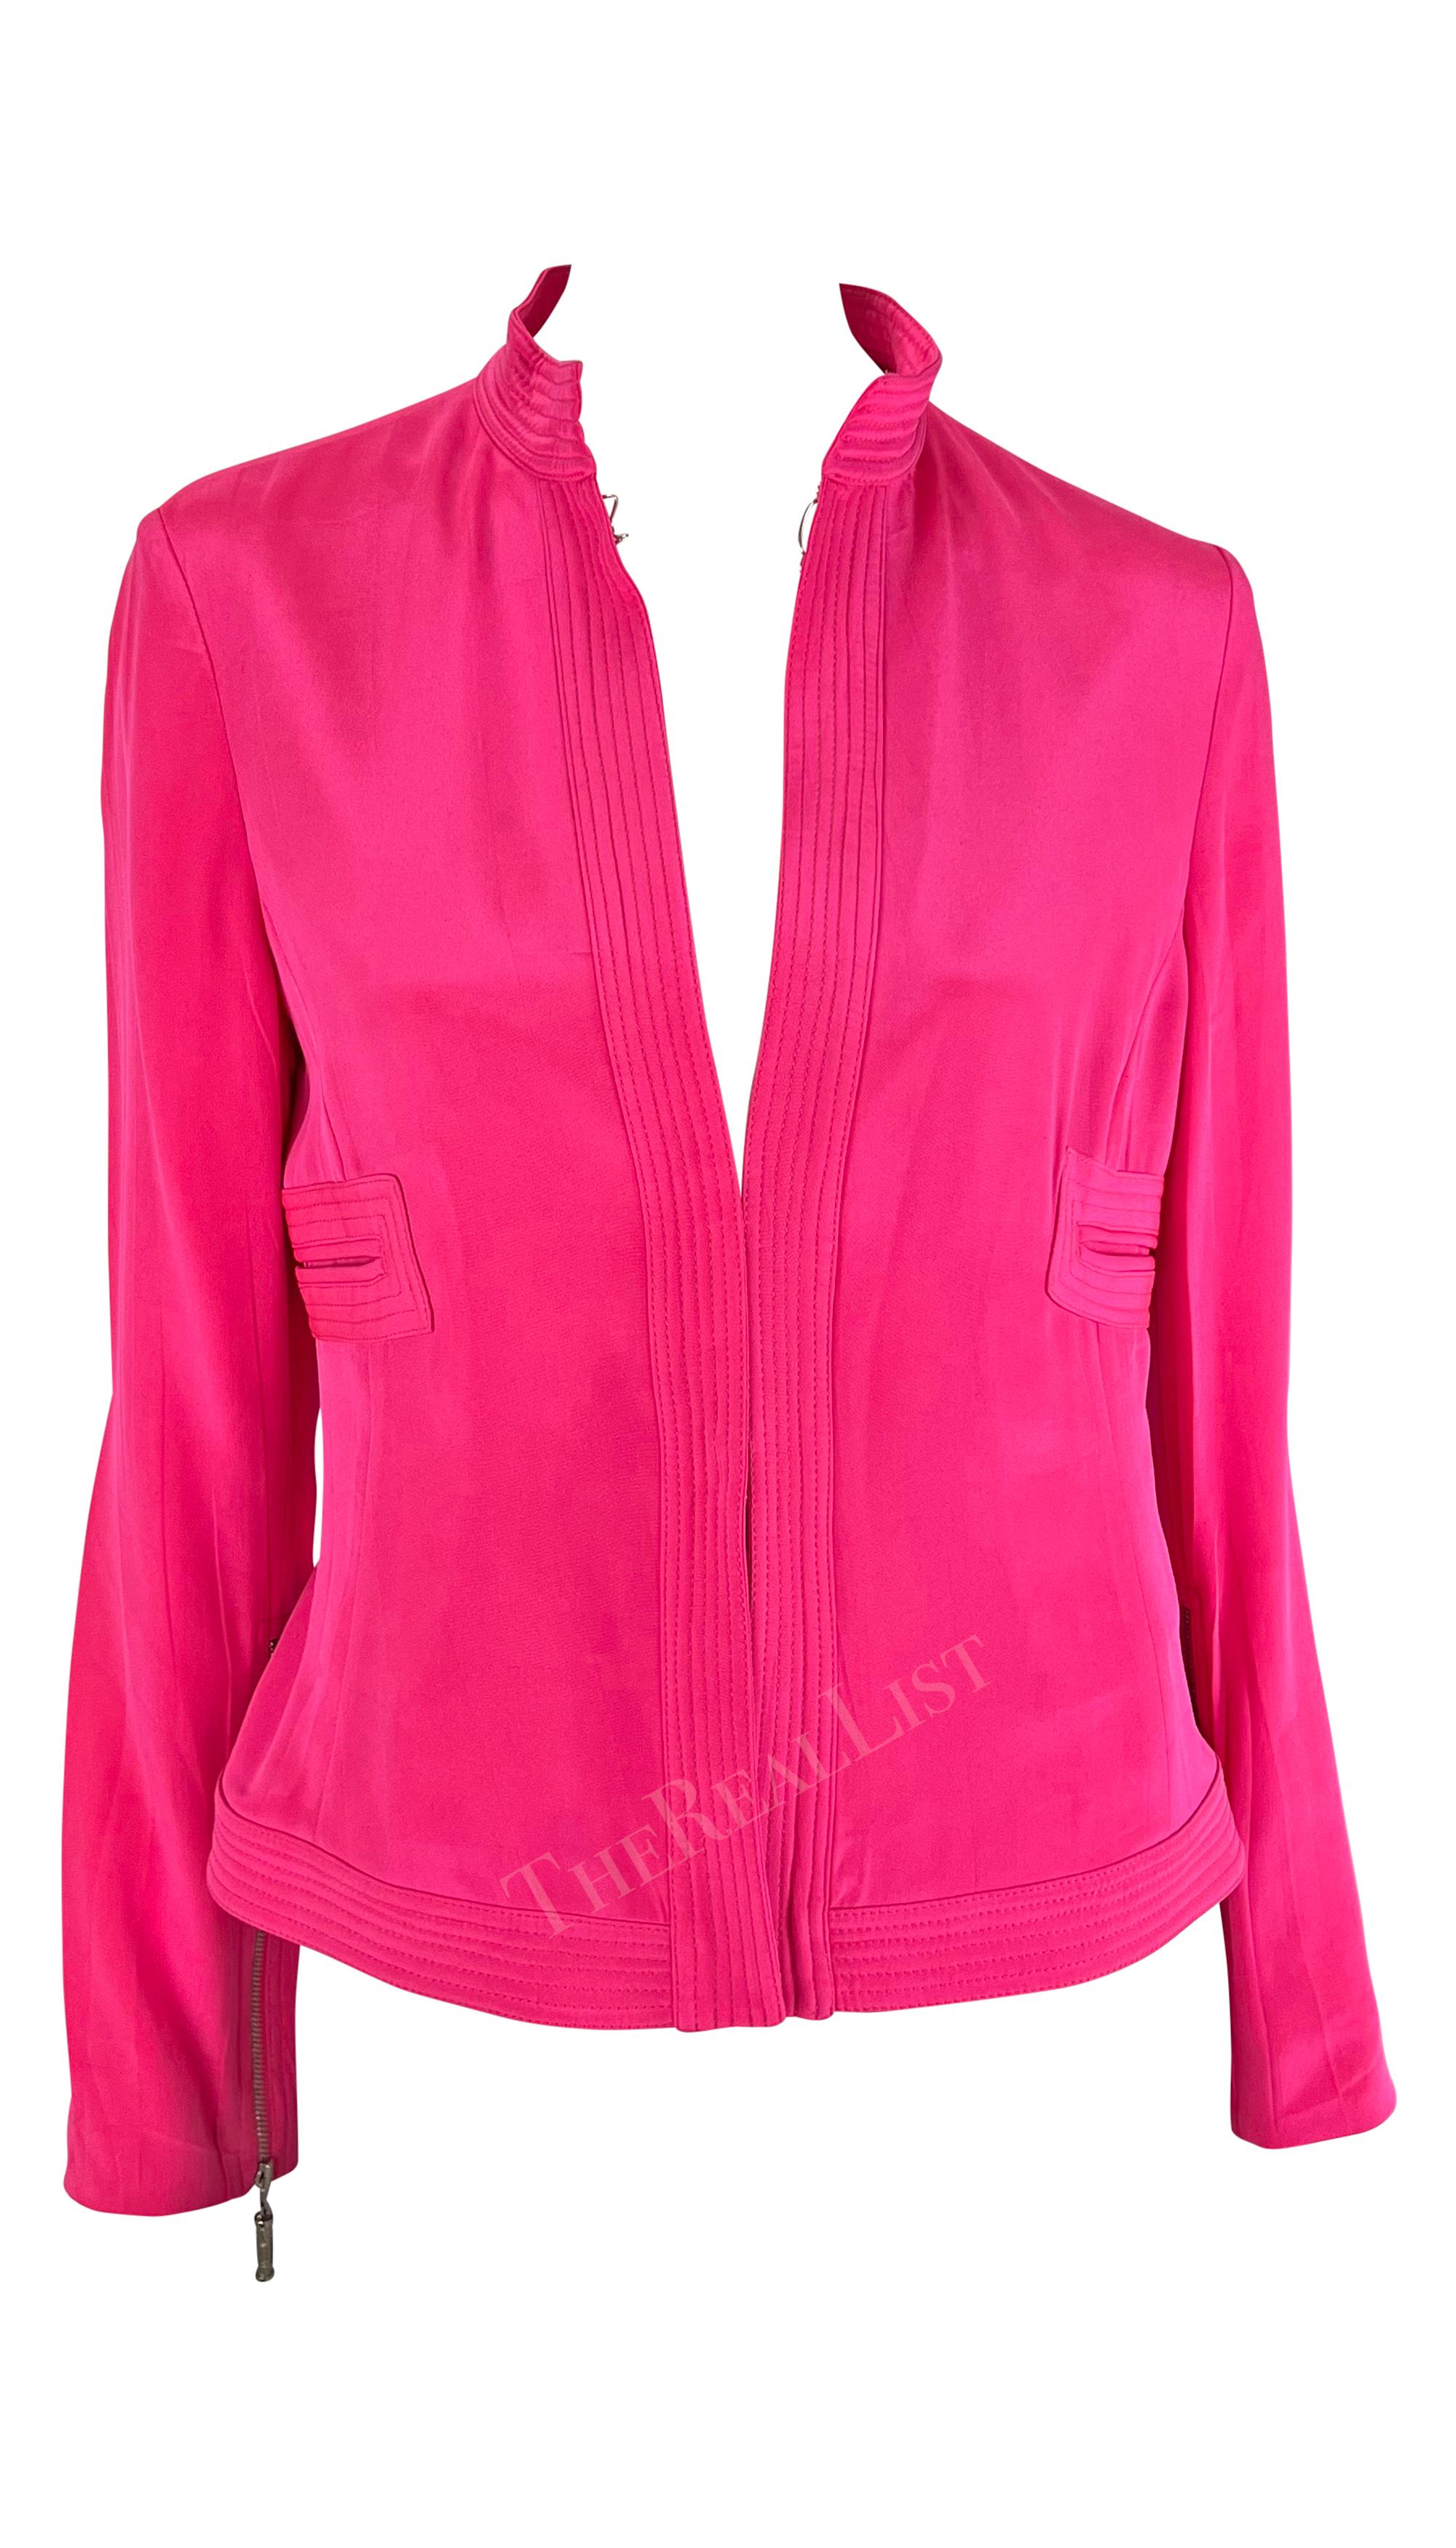 S/S 2003 Gianni Versace by Donatella Runway Hot Pink Long Sleeve Jacket  In Good Condition For Sale In West Hollywood, CA